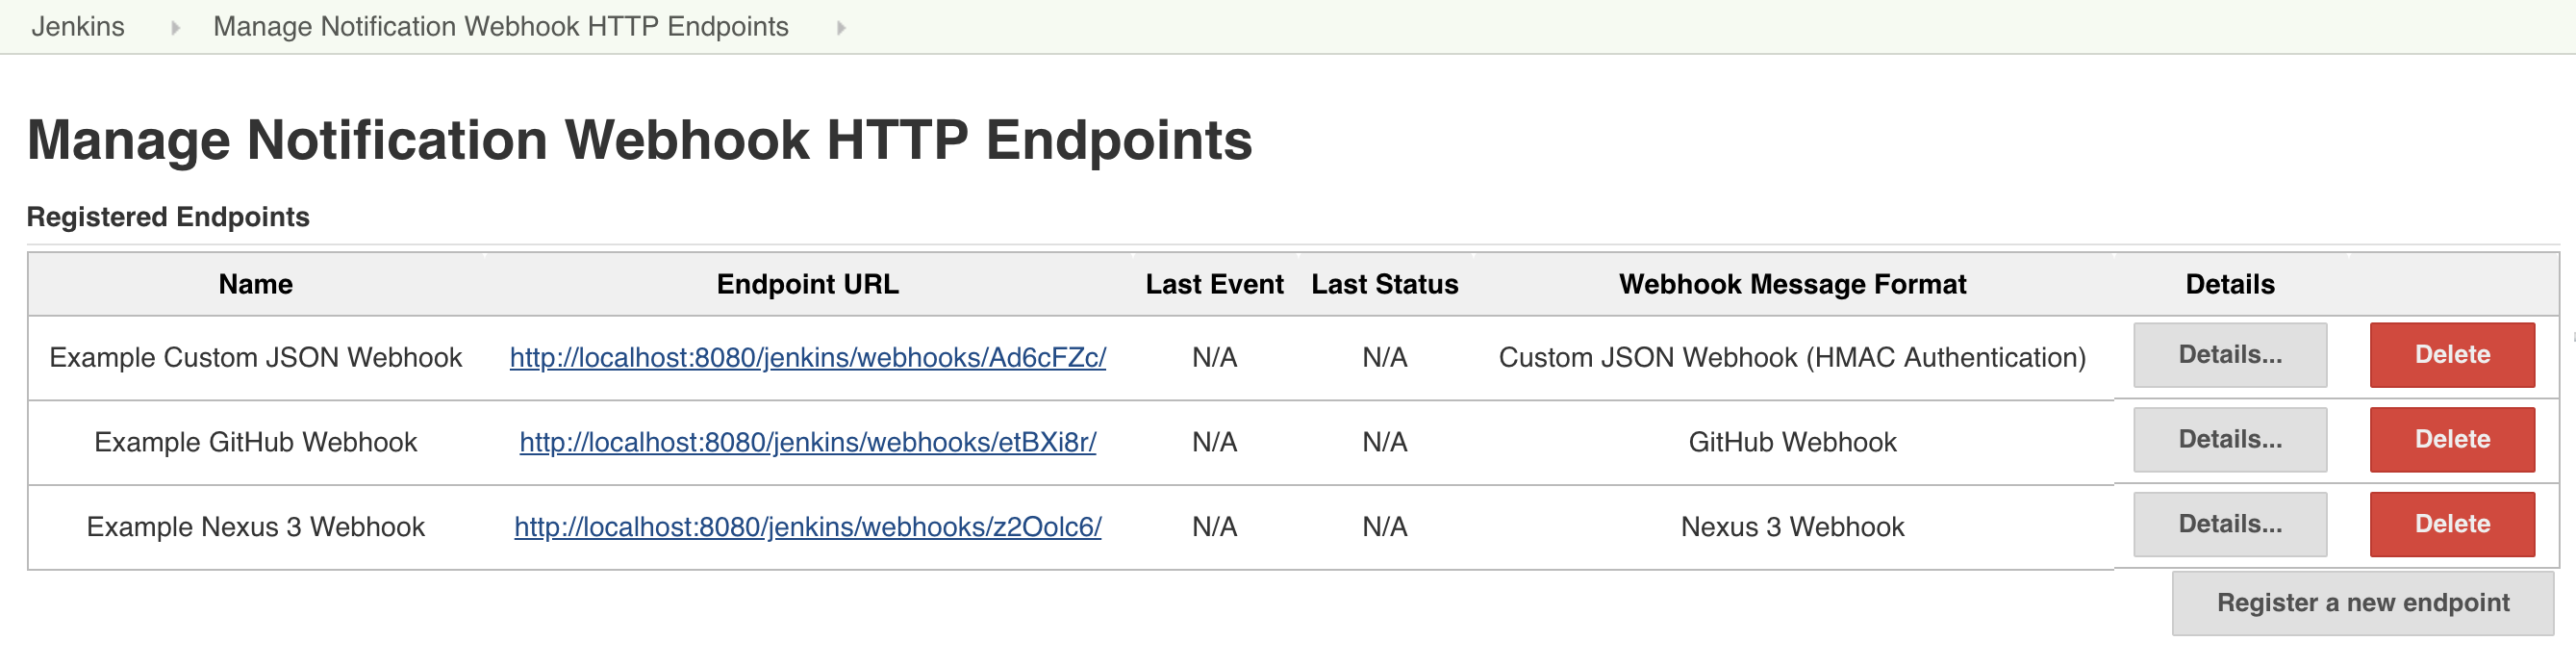 Figure 3. The external HTTP endpoints configuration page